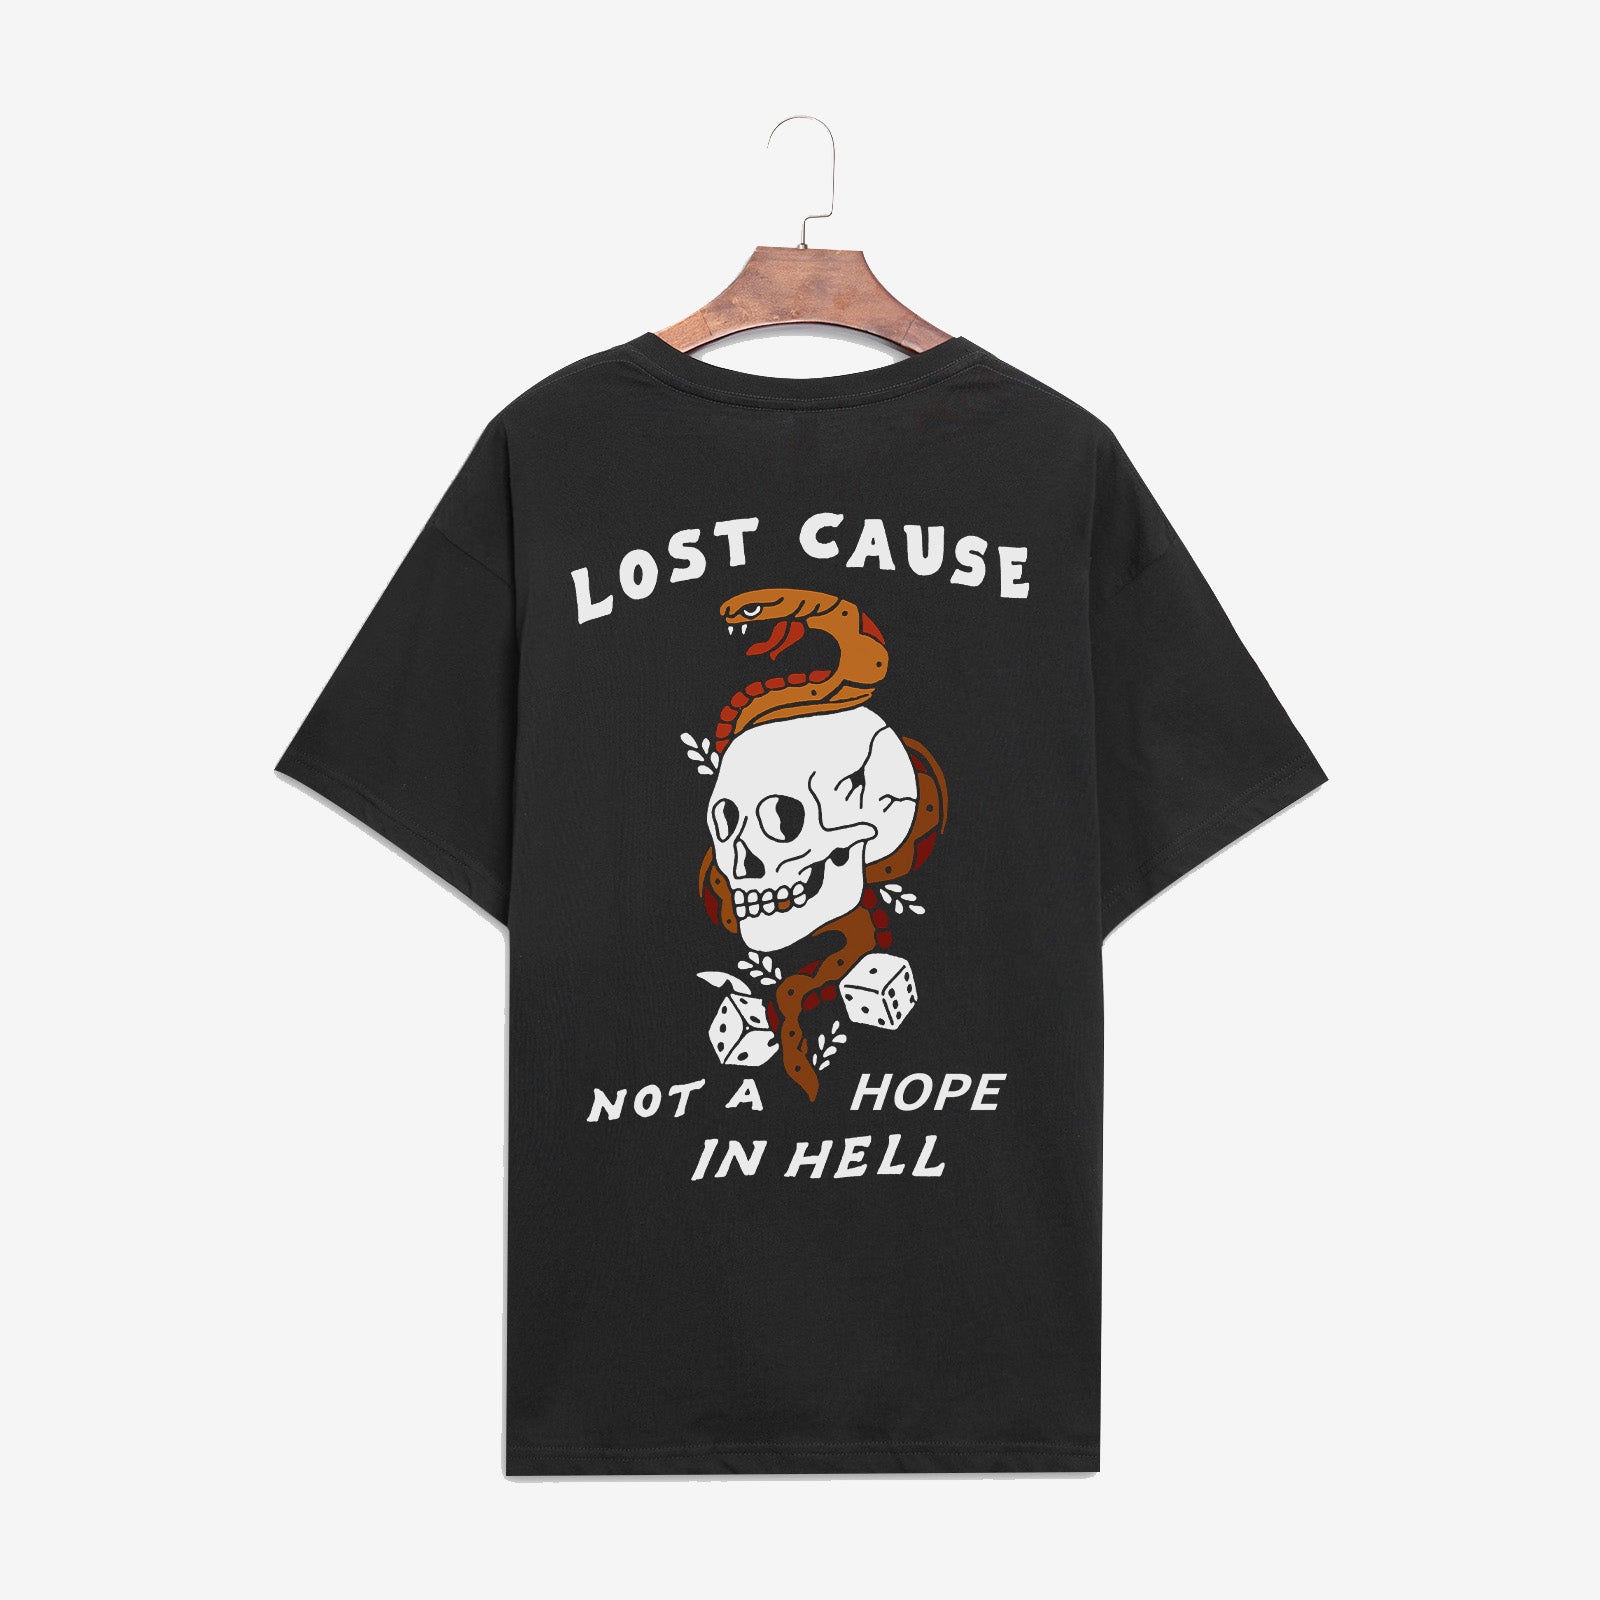 Not A Hope In Hell Skull Print T-Shirt